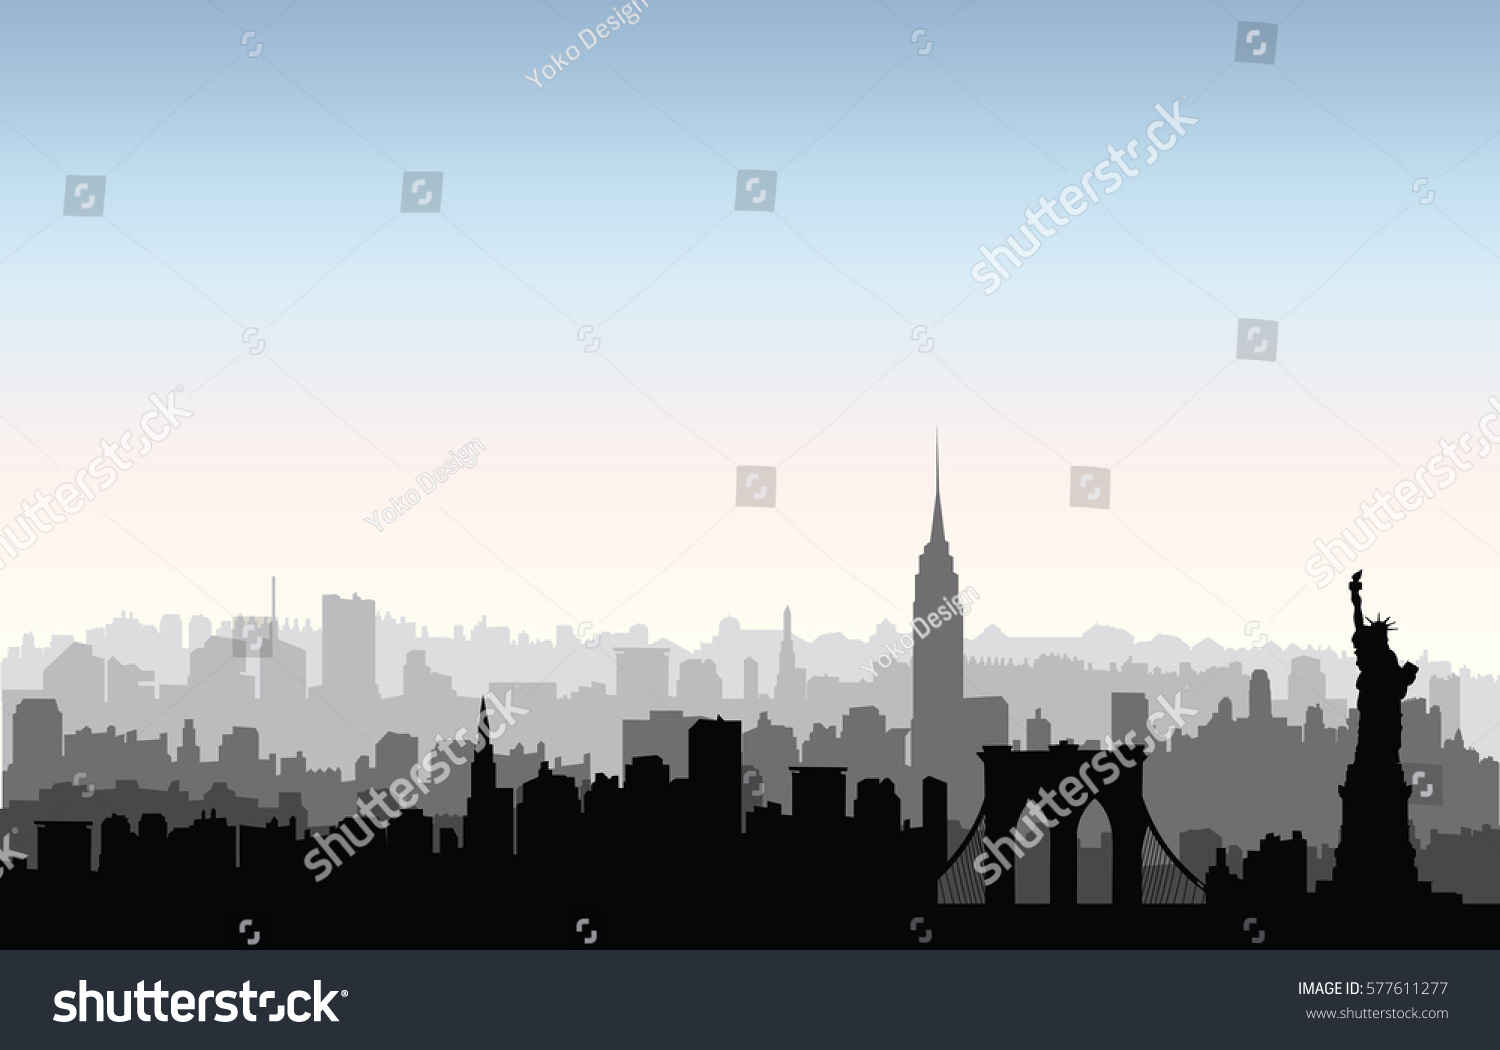 SVG of New York, USA skyline. NYC city silhouette with Liberty monument. American landmarks. Urban  architectural landscape. Cityscape with famous buildings svg